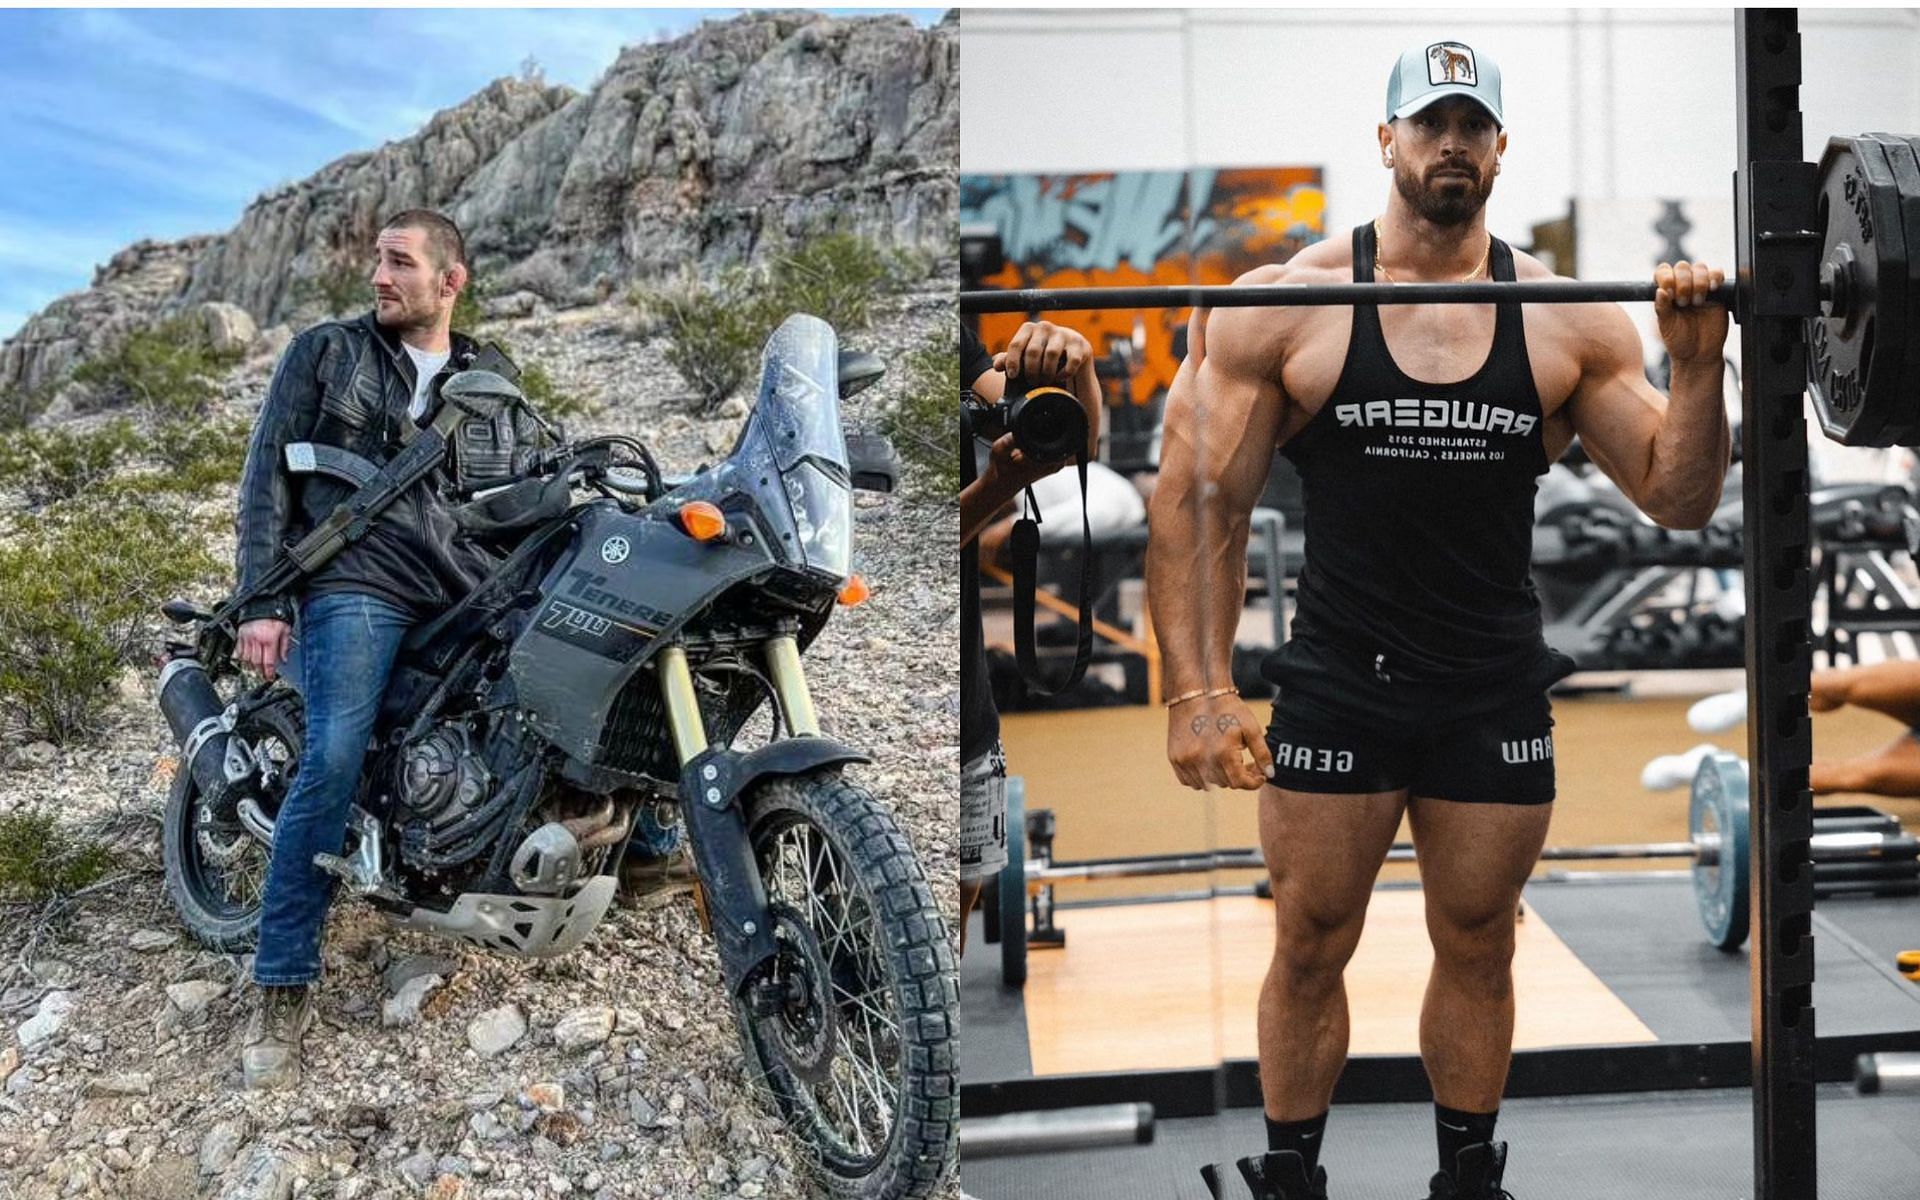 Sean Strickland on his bike (left) and Bradley Martyn in the gym (right) (Images courtesy @stricklandmma and @bradleymartyn on Instagram)